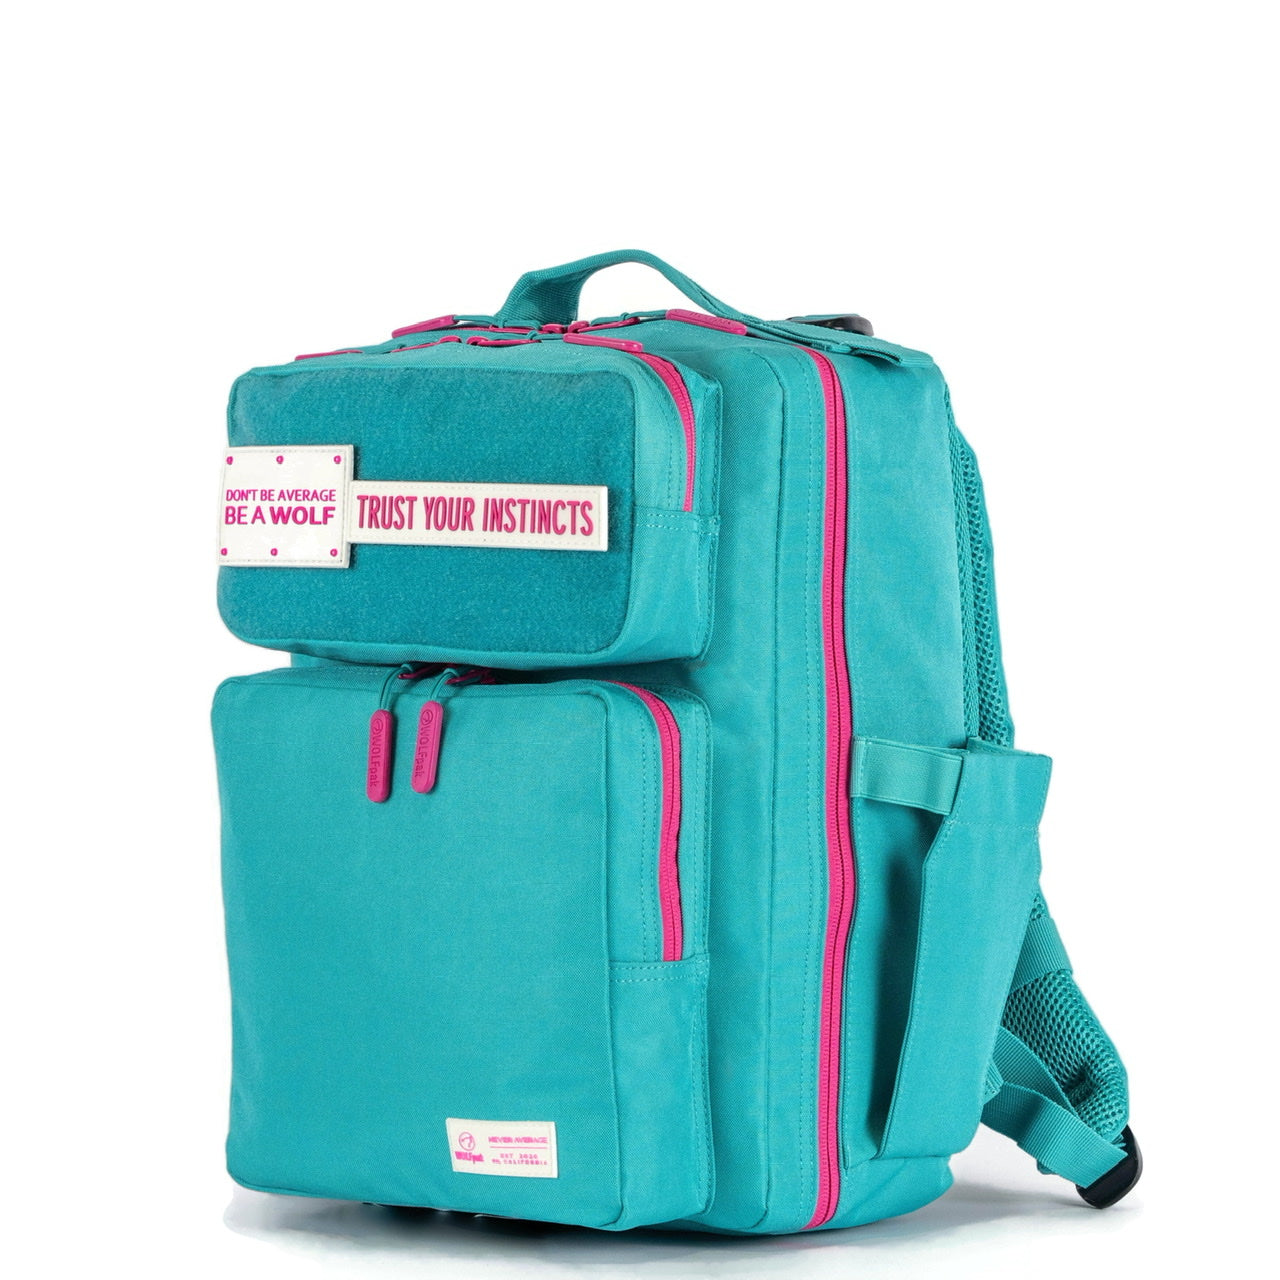 15L Backpack Miami Vice